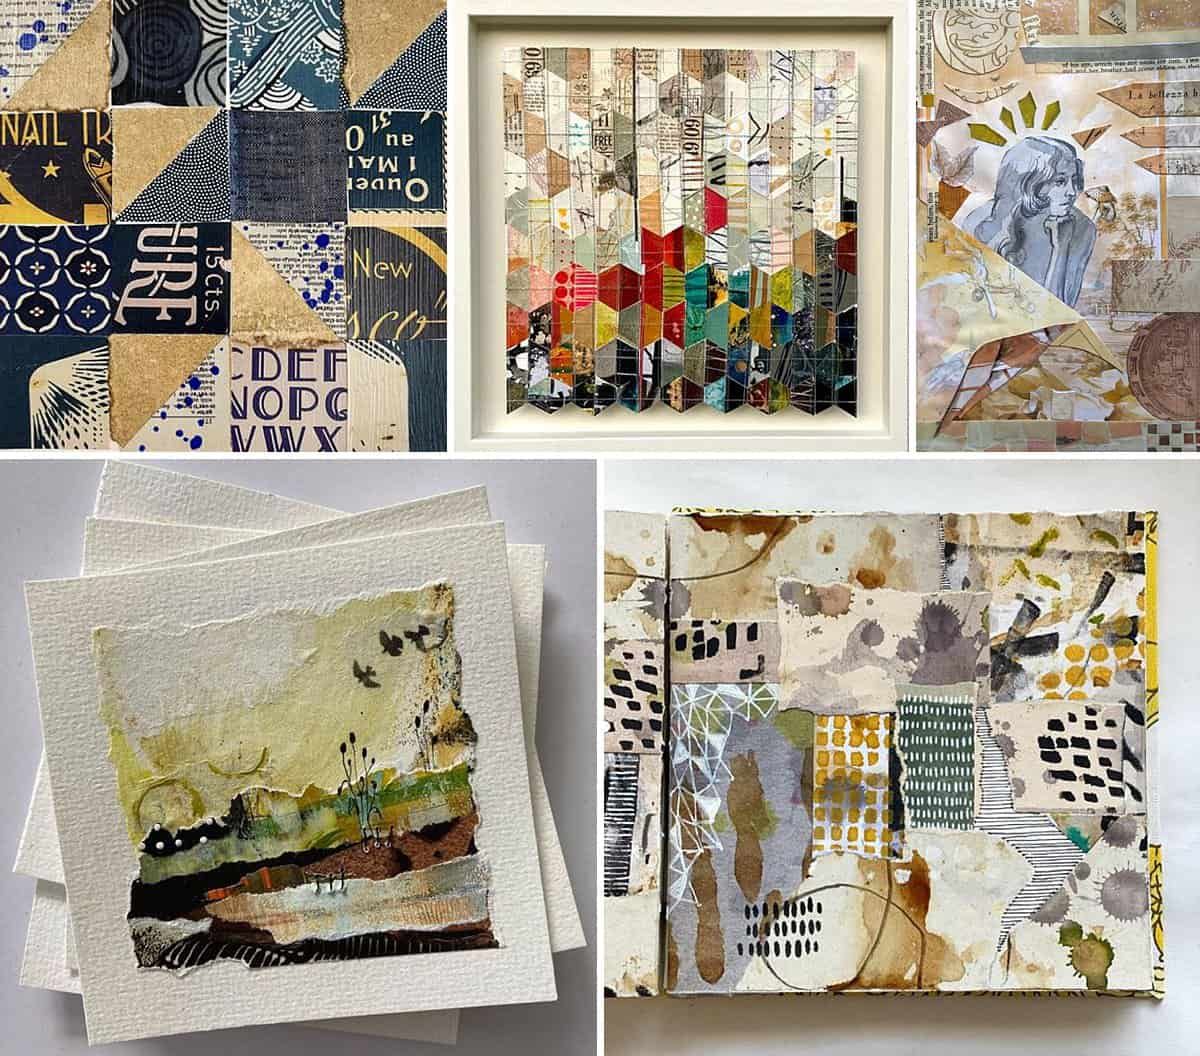 Coffee & Upcycled Multi-Media Collage | Summer Art Hangout